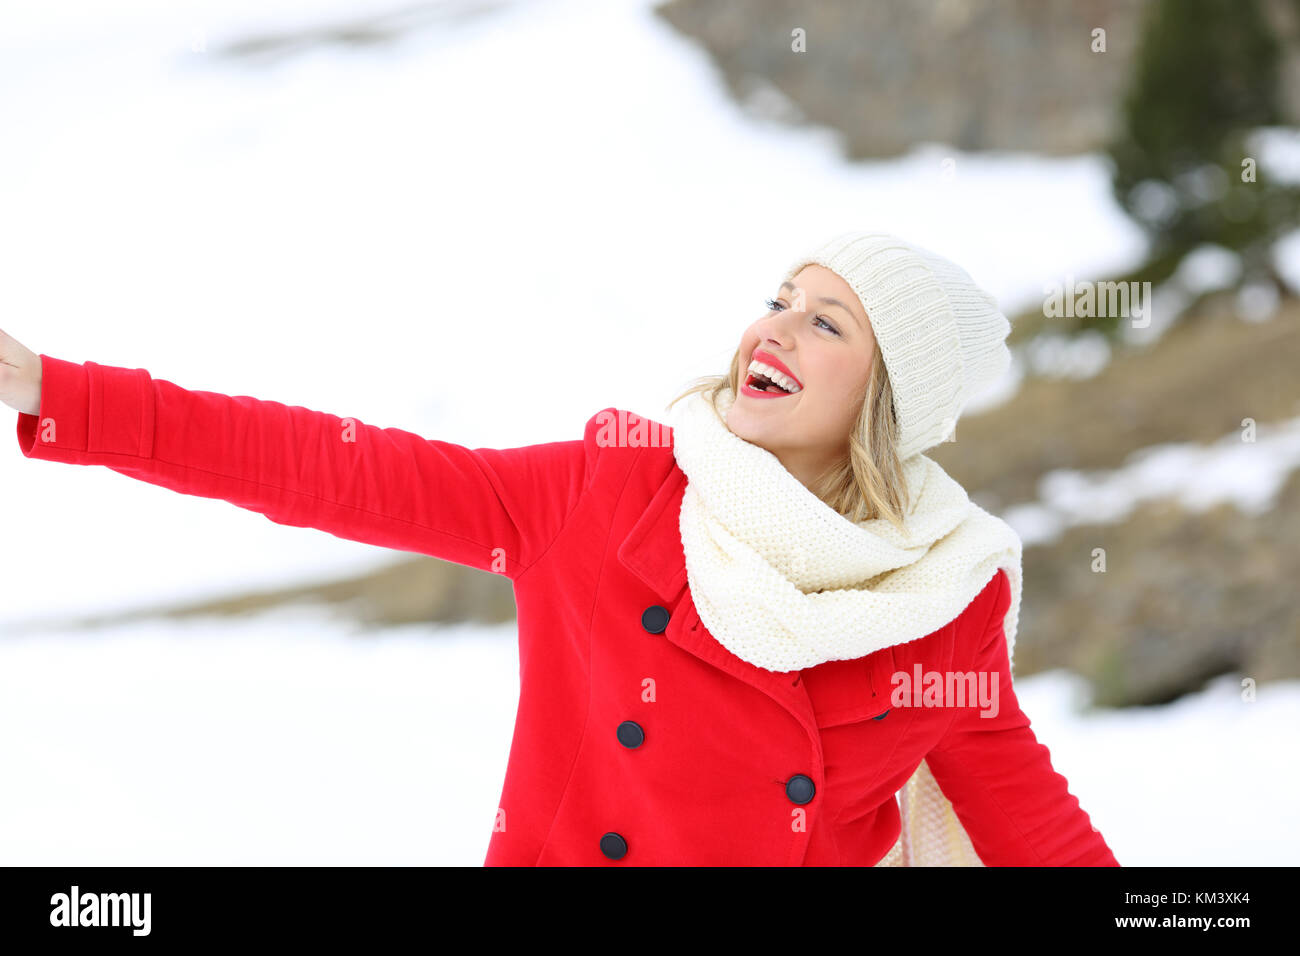 Portrait of a candid woman in red enjoying outdoors in a snowy mountain in winter Stock Photo